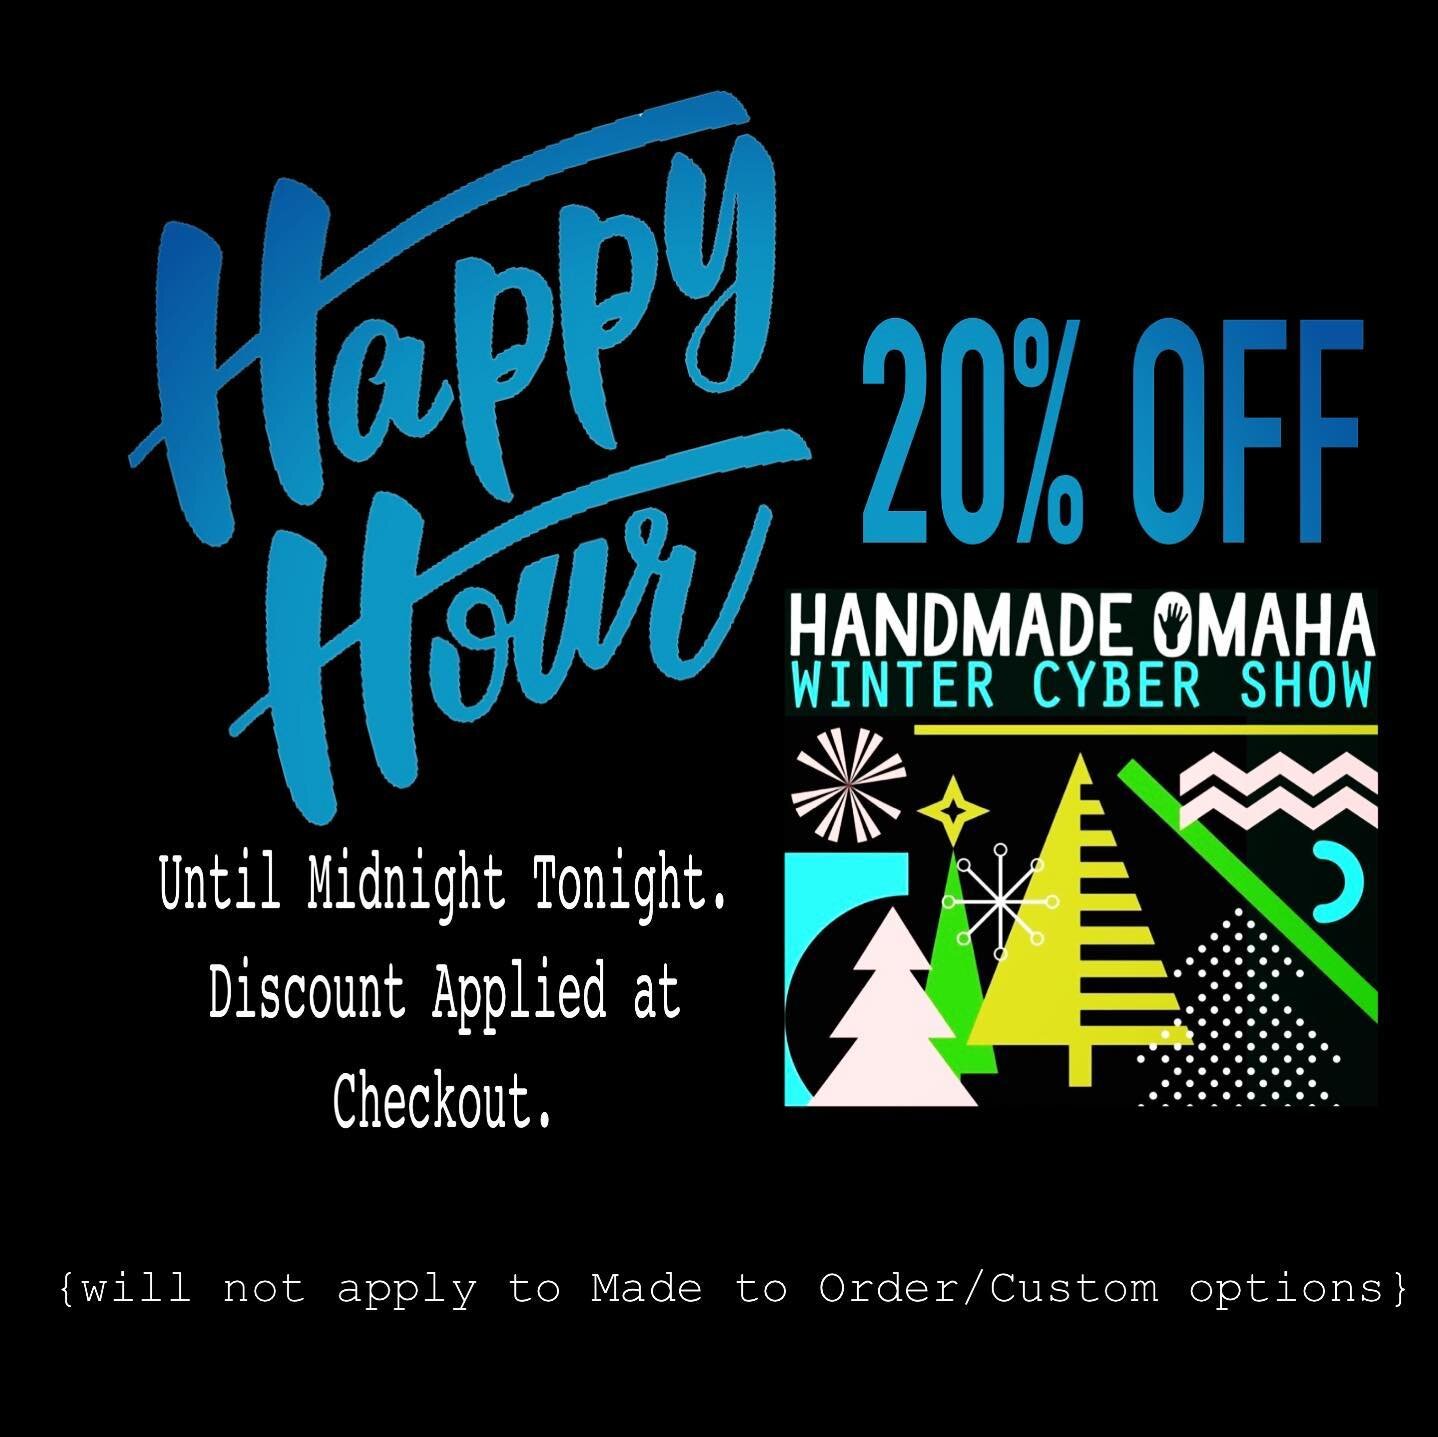 Surprise! HAPPY HOURS UNTIL MIDNIGHT!

20% Off all in-stock items.

1- go to the link in bio
2- click Shop All
-or- type Cyber2020 in the search bar
3- Choose Item
4- Save at Checkout! 

📚 Happy Happy Hour! 📚
&bull;
&bull;
&bull;
#shopsmall #thanky